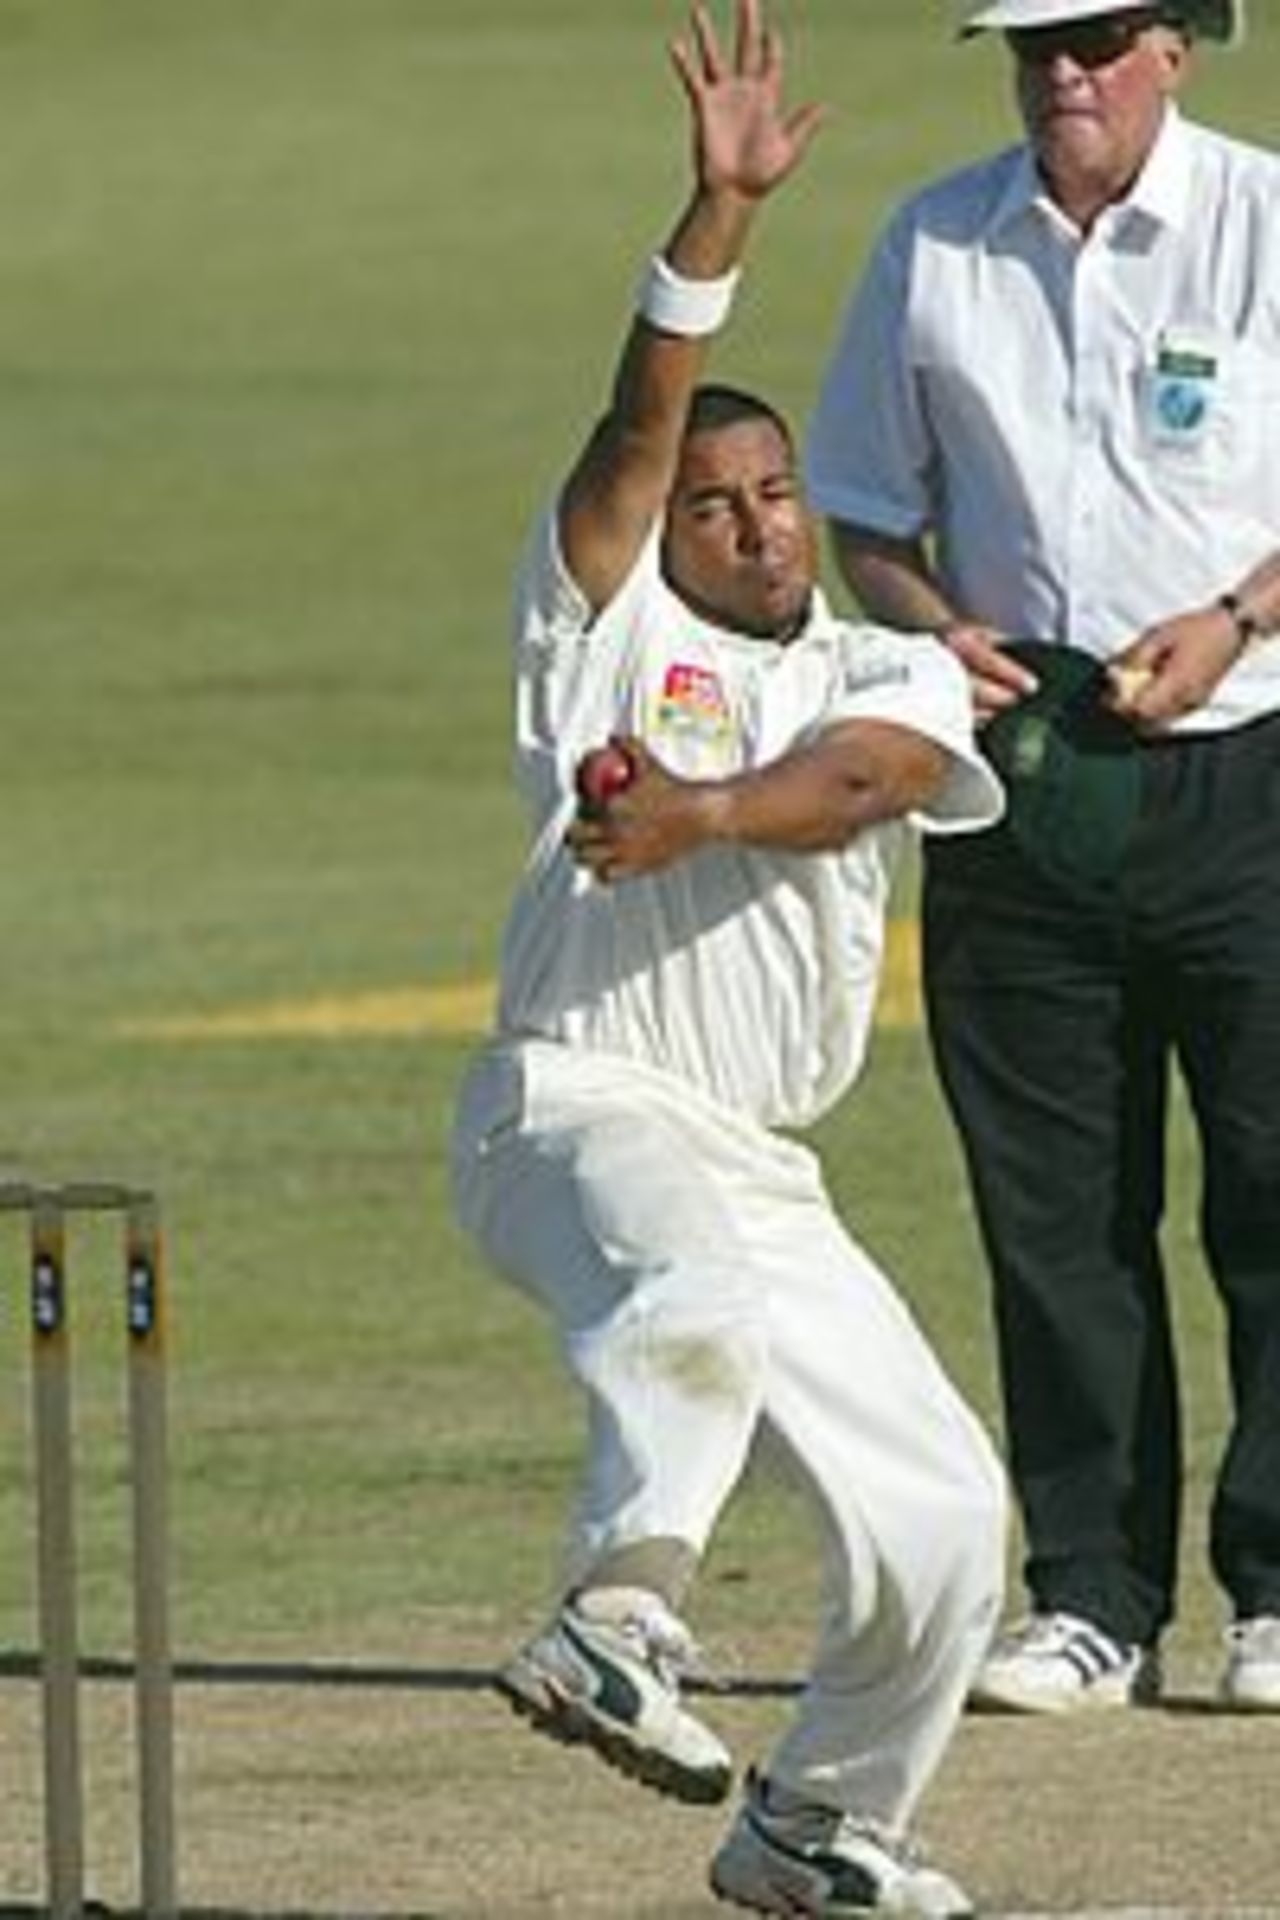 16 Mar 2002: Paul Adams of South Africa during the second day of the third test between South Africa and Australia, played at Kingsmead, Durban, South Africa.